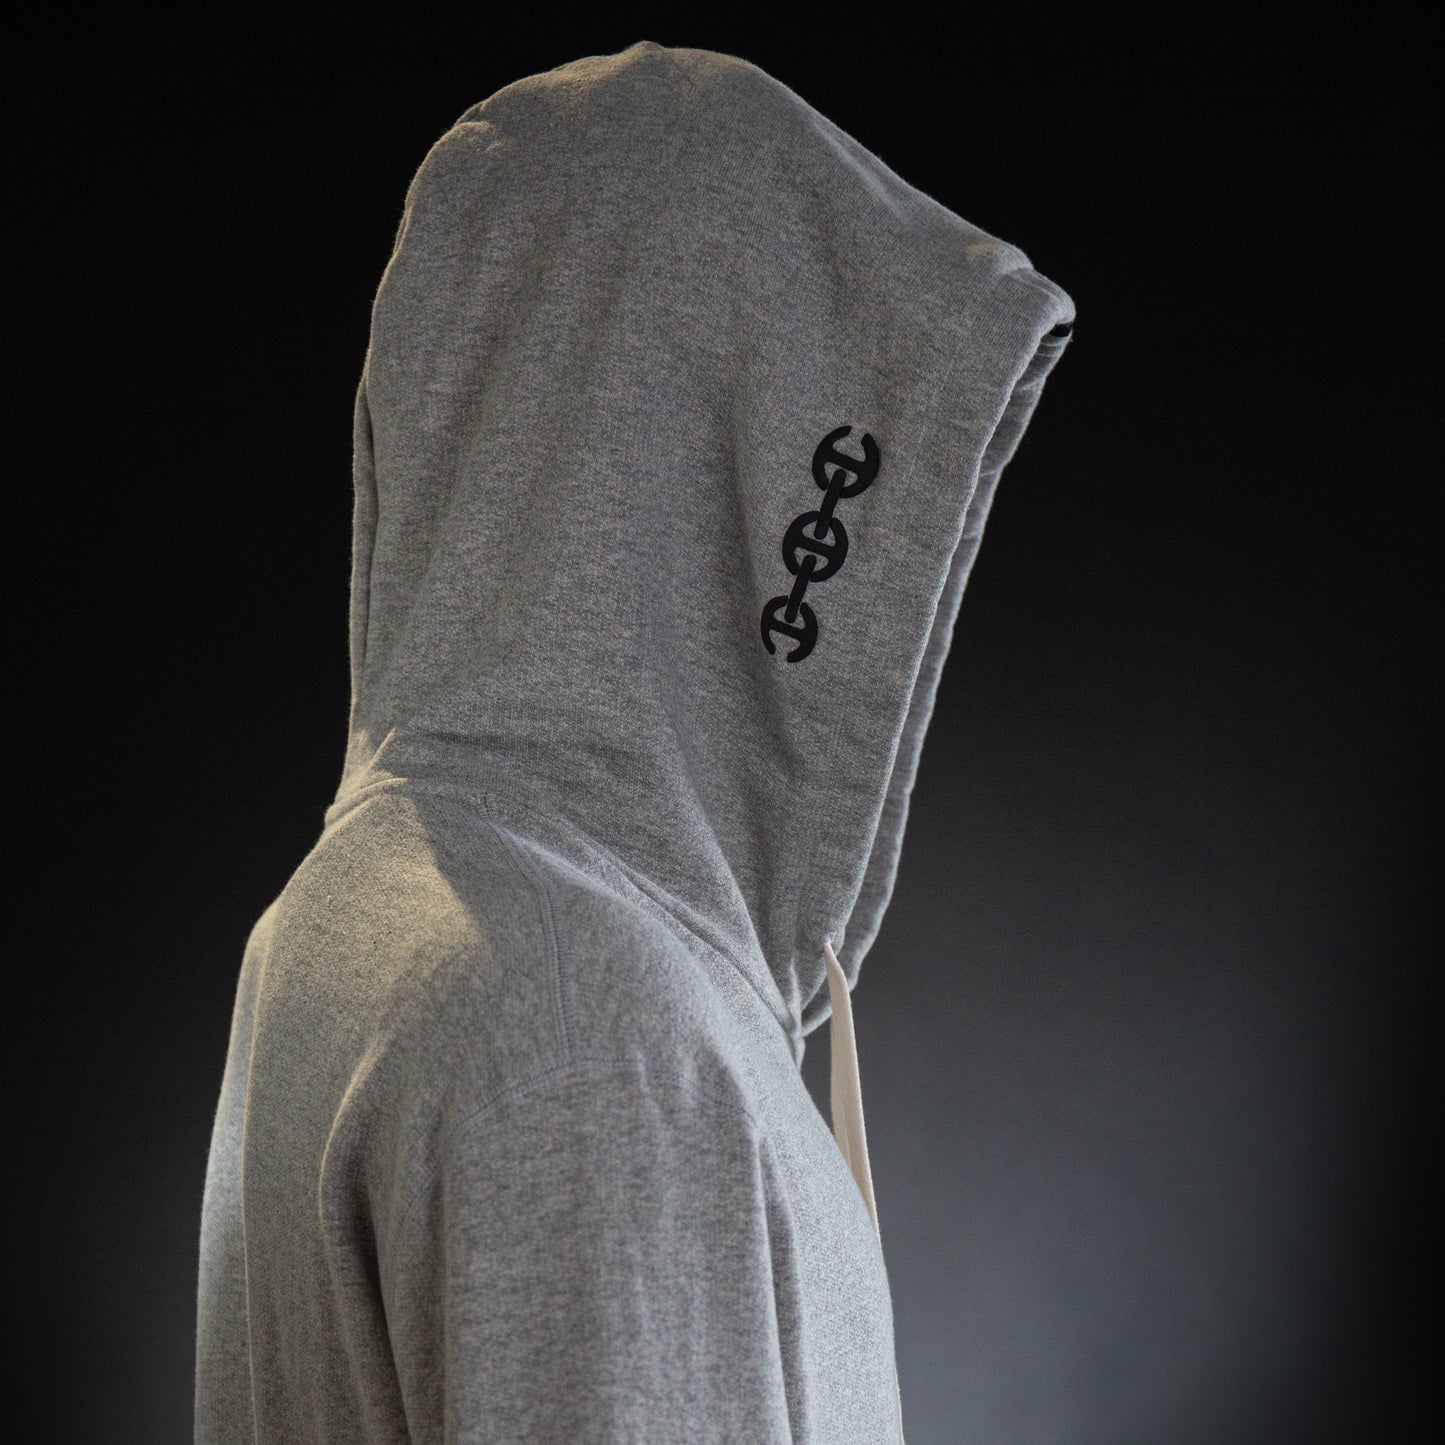 GREY PATCH HOODIE